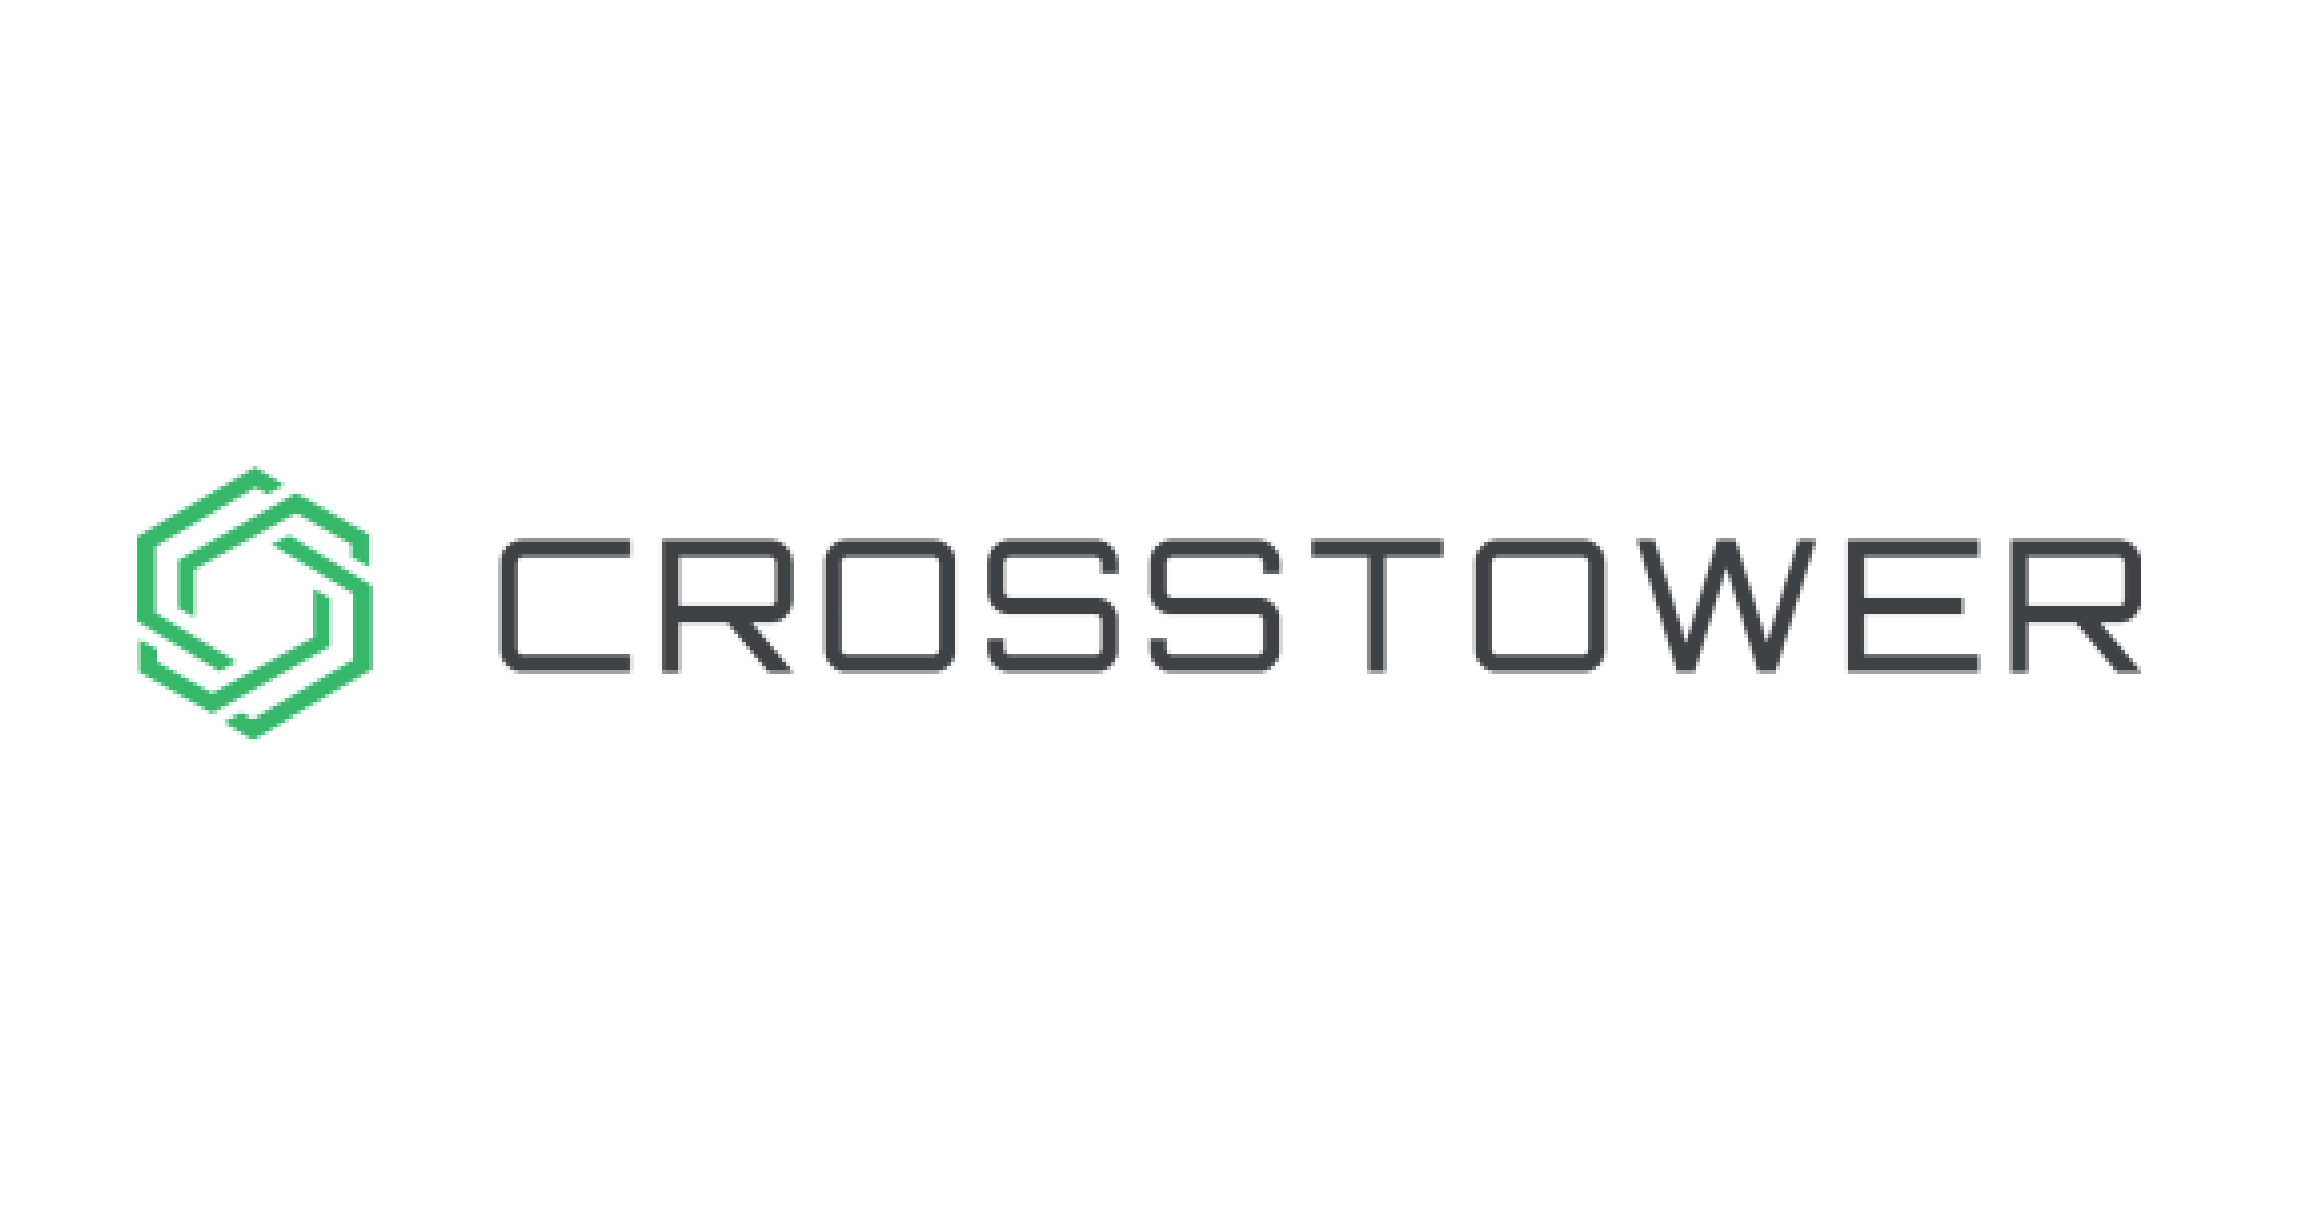 On a mission to mainstream digital asset investing and trading, capital markets veterans launch CrossTower Exchange